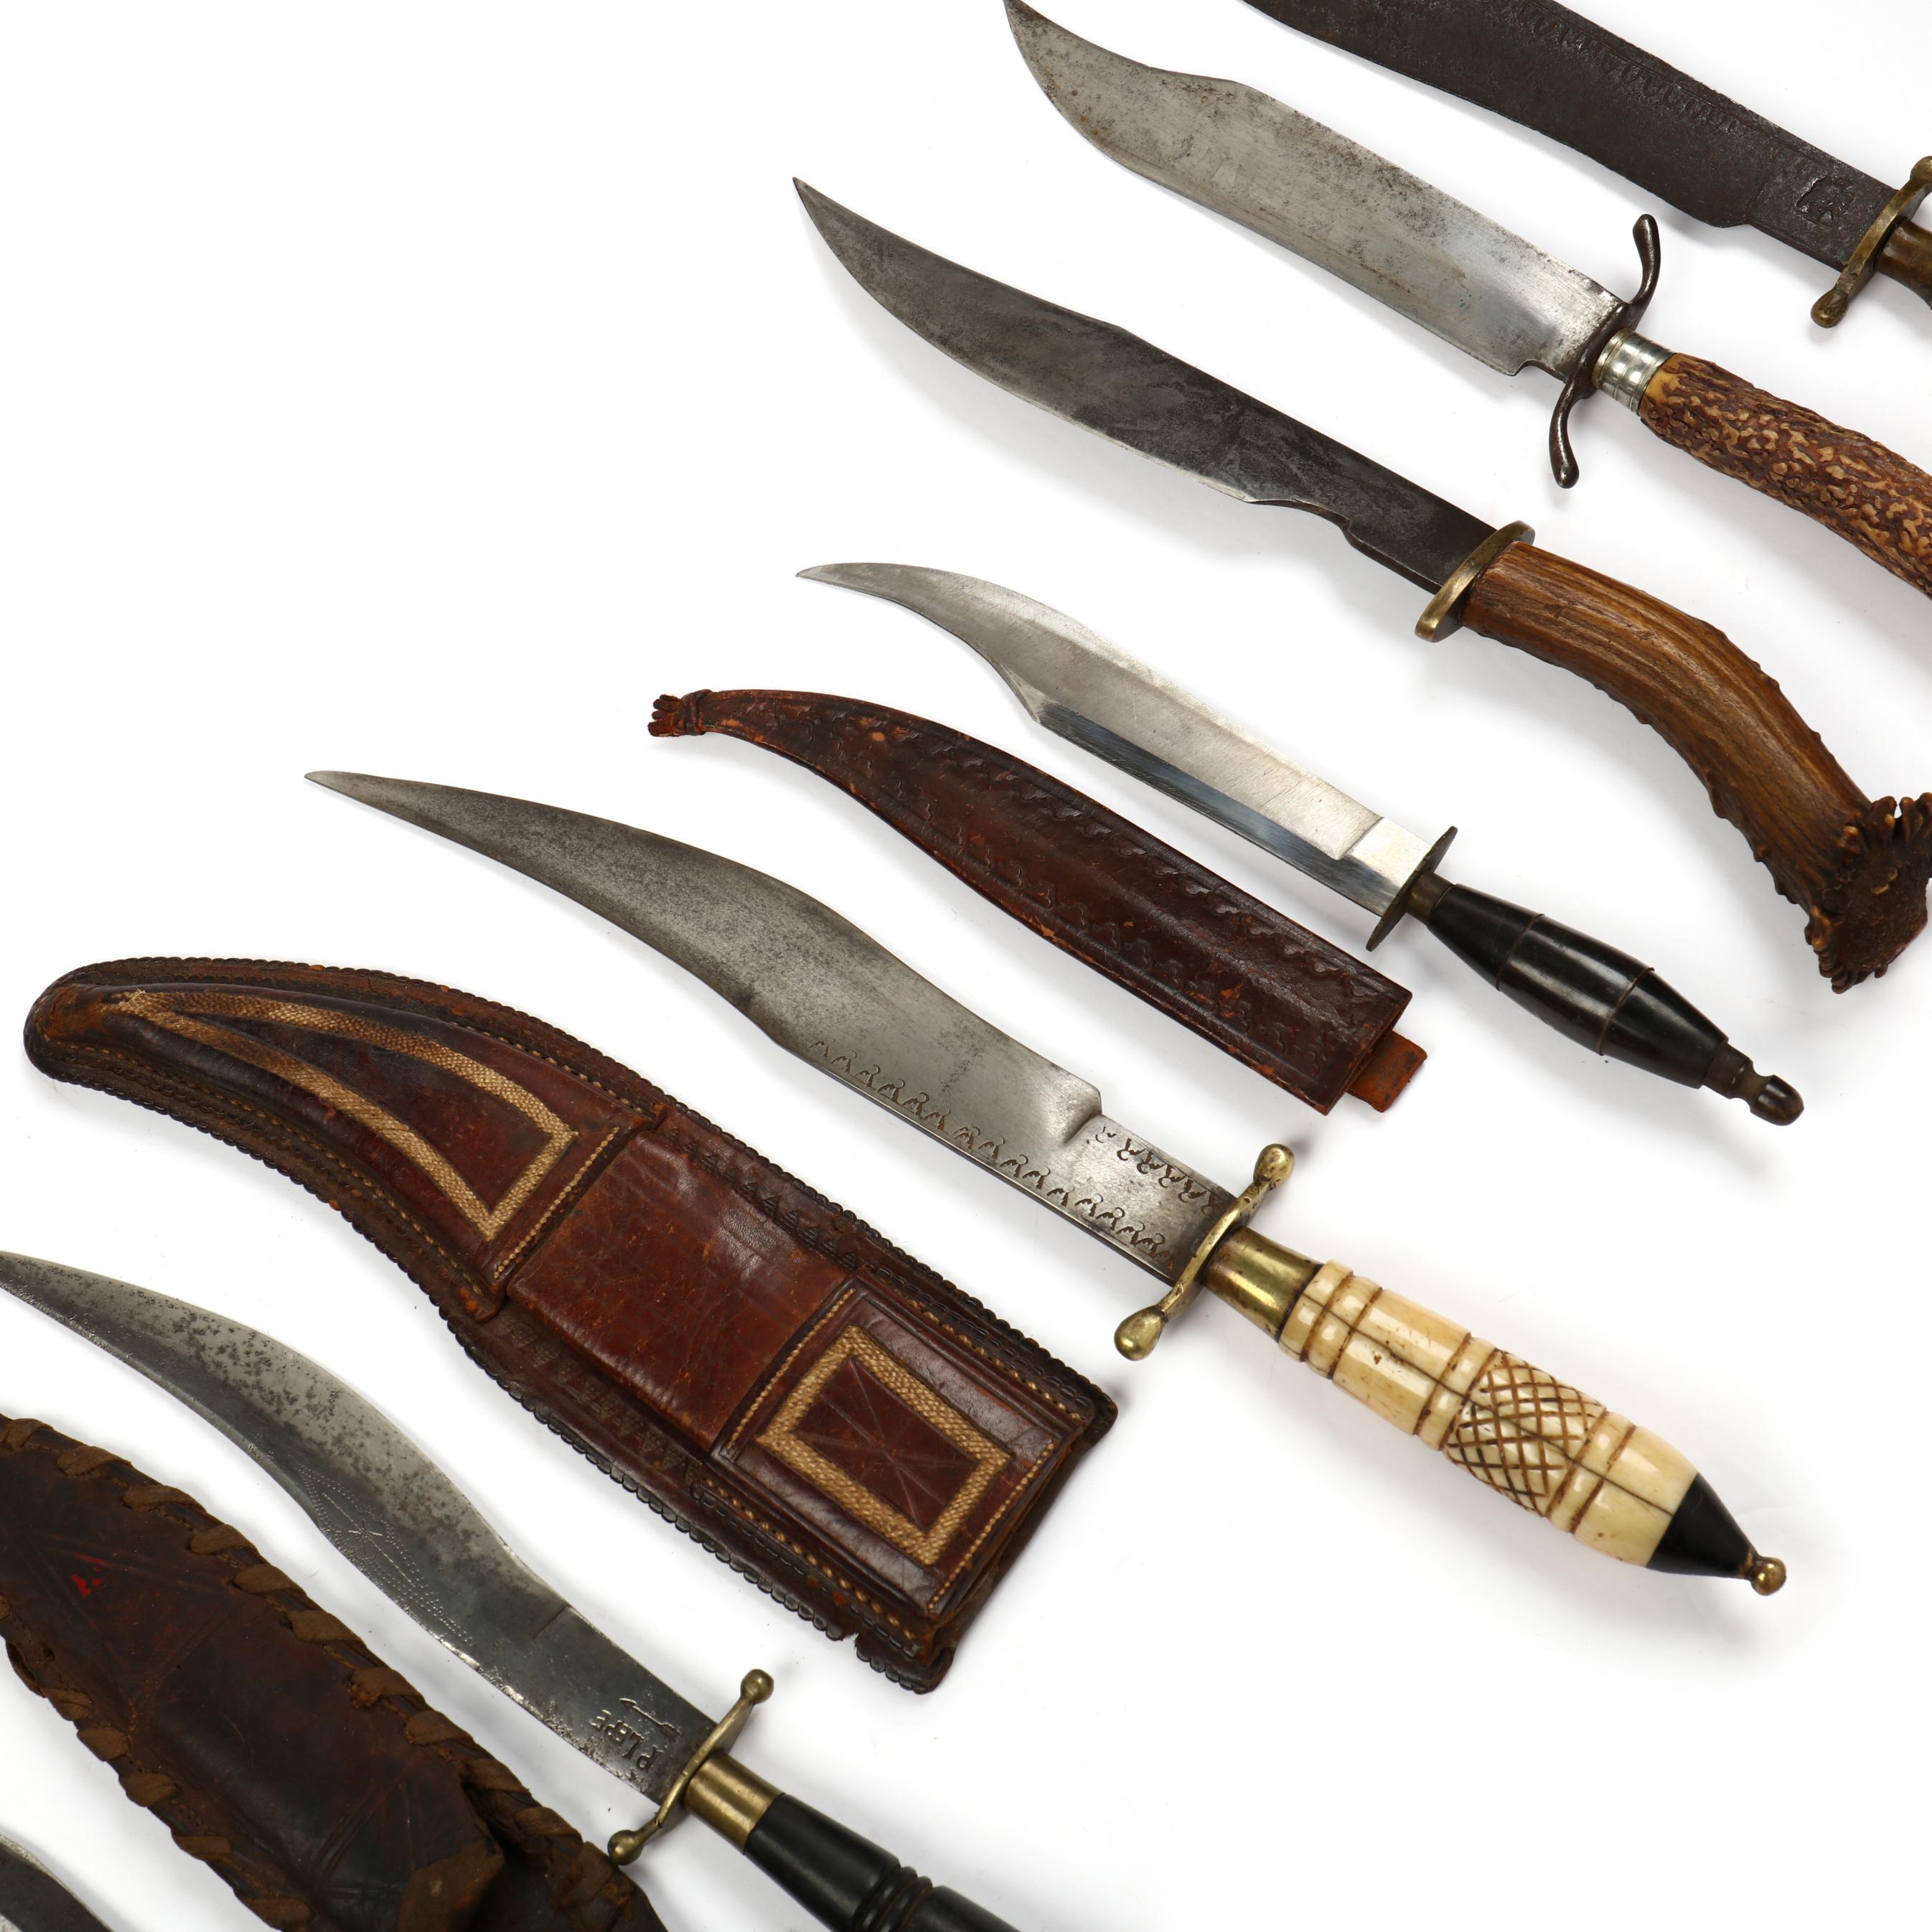 Sold at Auction: MEXICAN FIXED-BLADE FIGHTING / BOWIE KNIVES, LOT OF FIVE